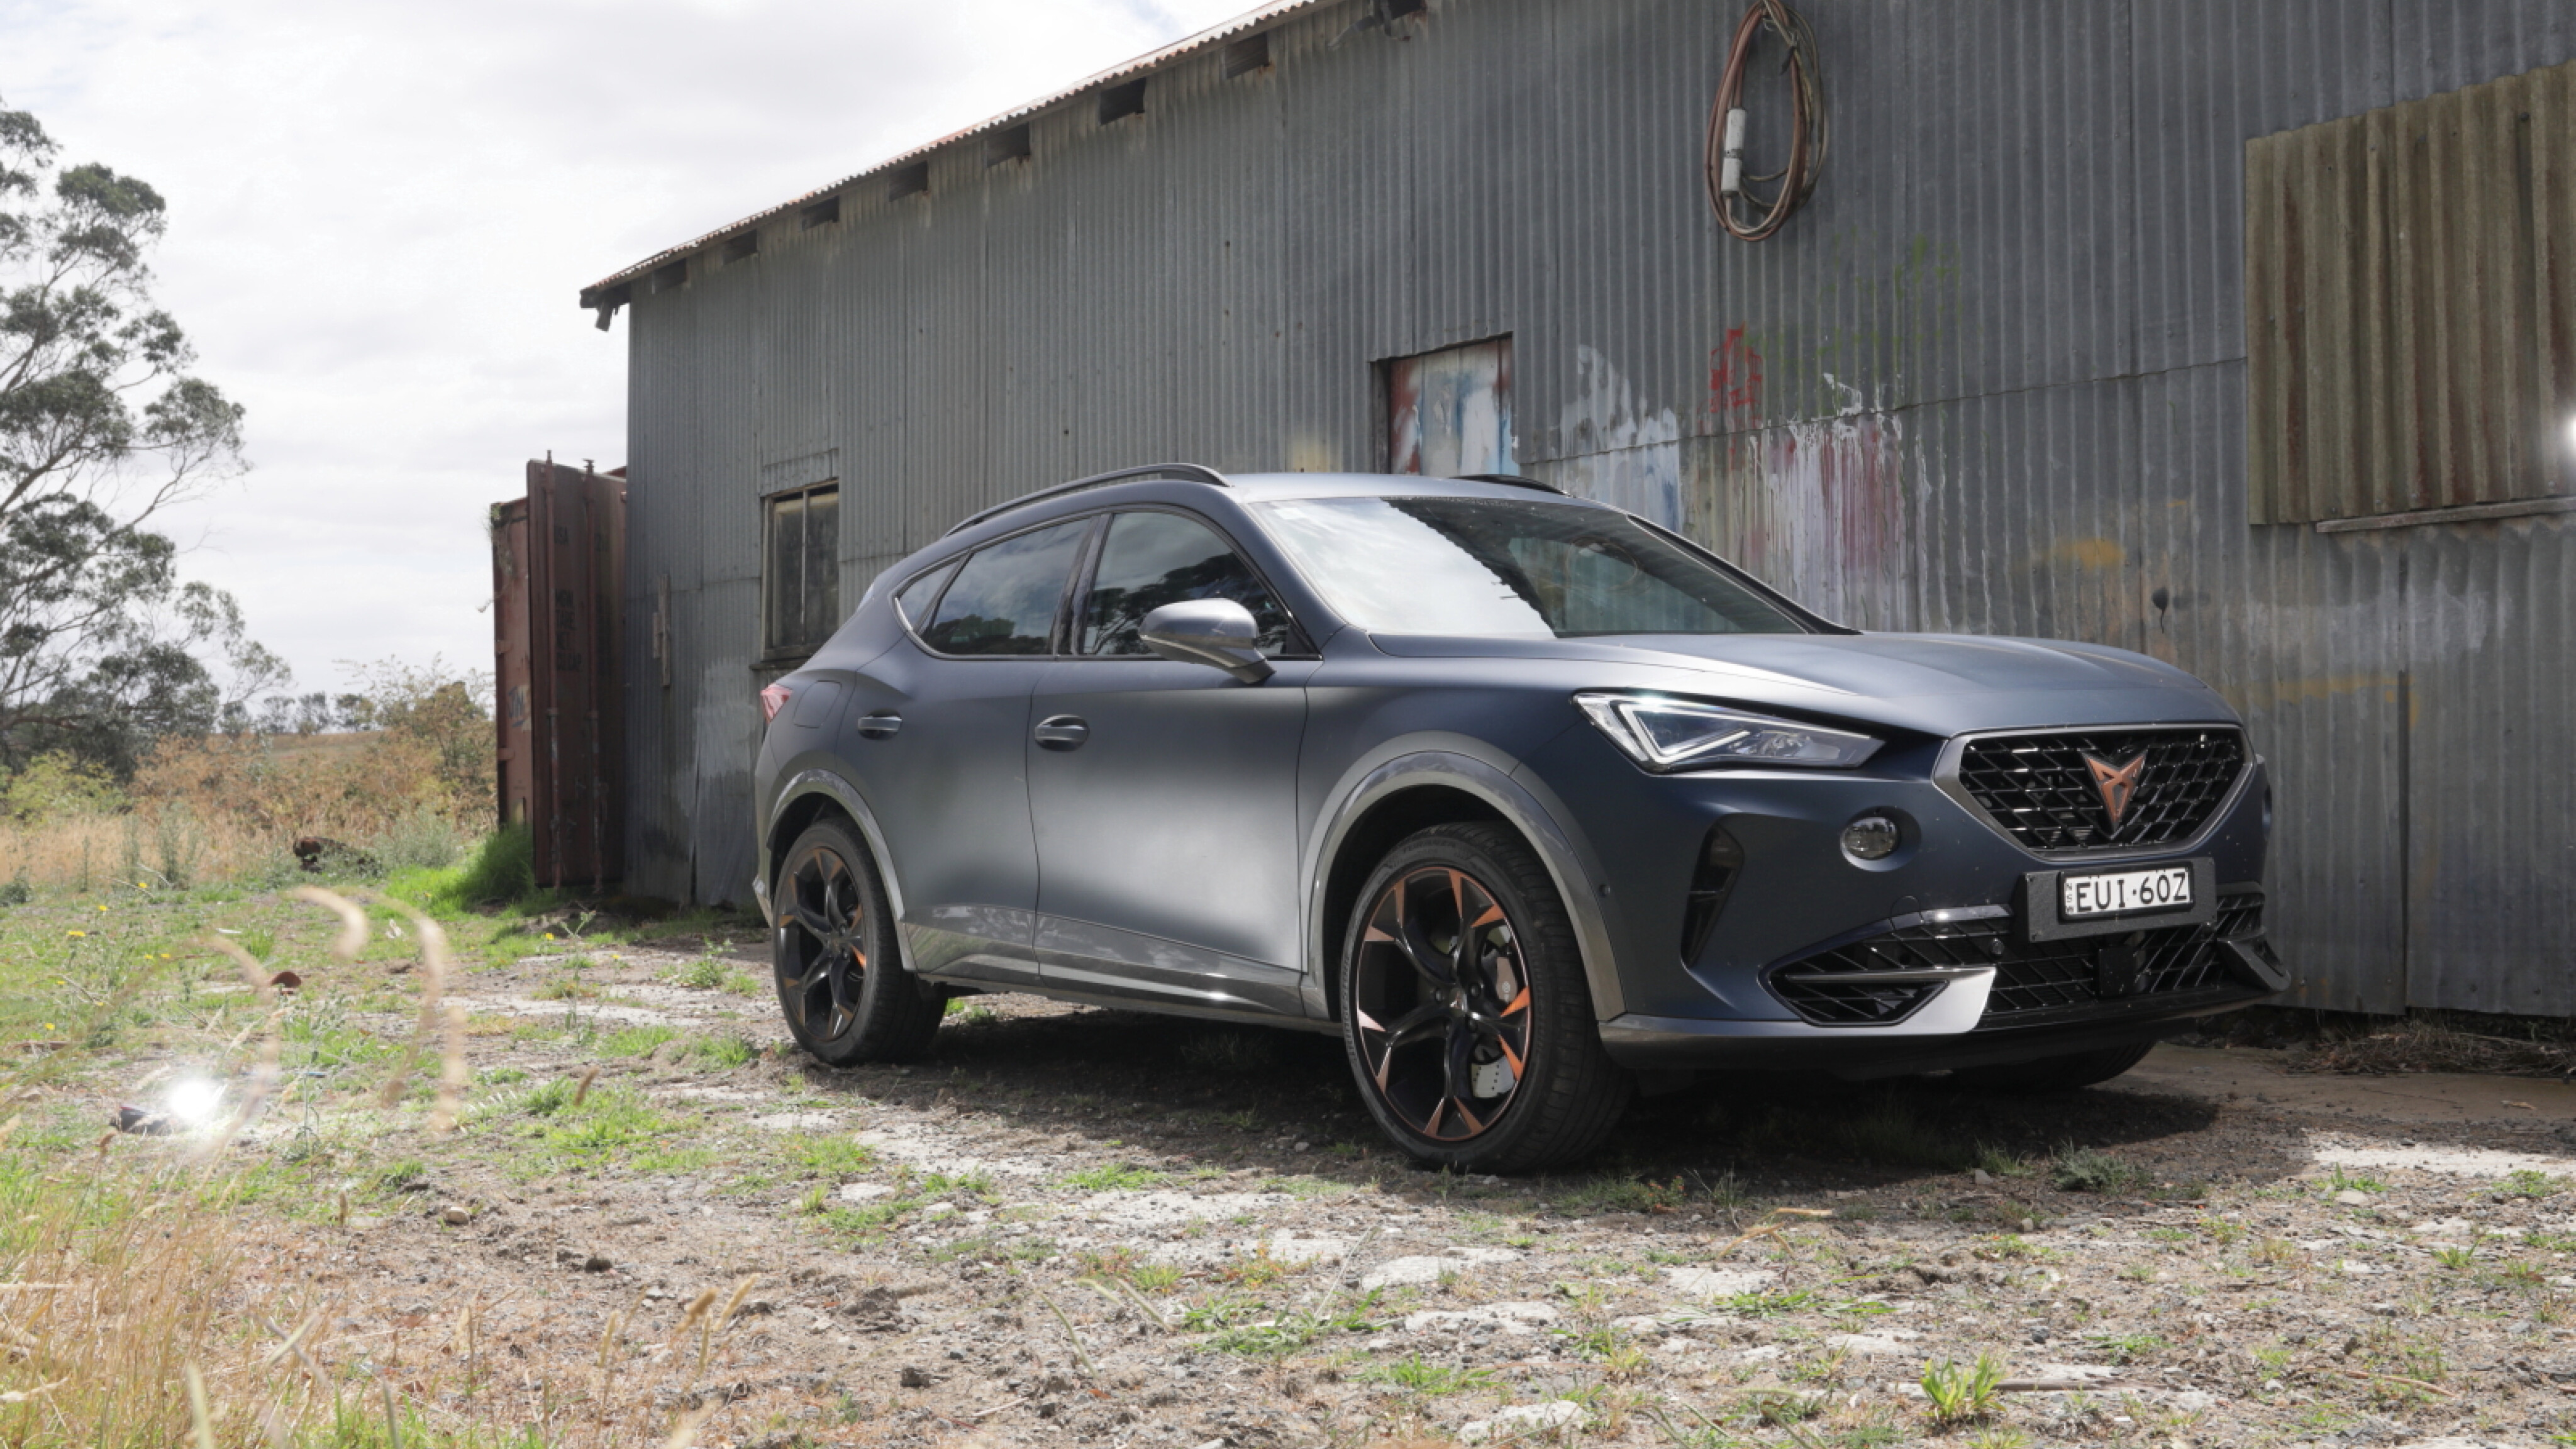 The Cupra Formentor is a new, bespoke Not-Seat SUV